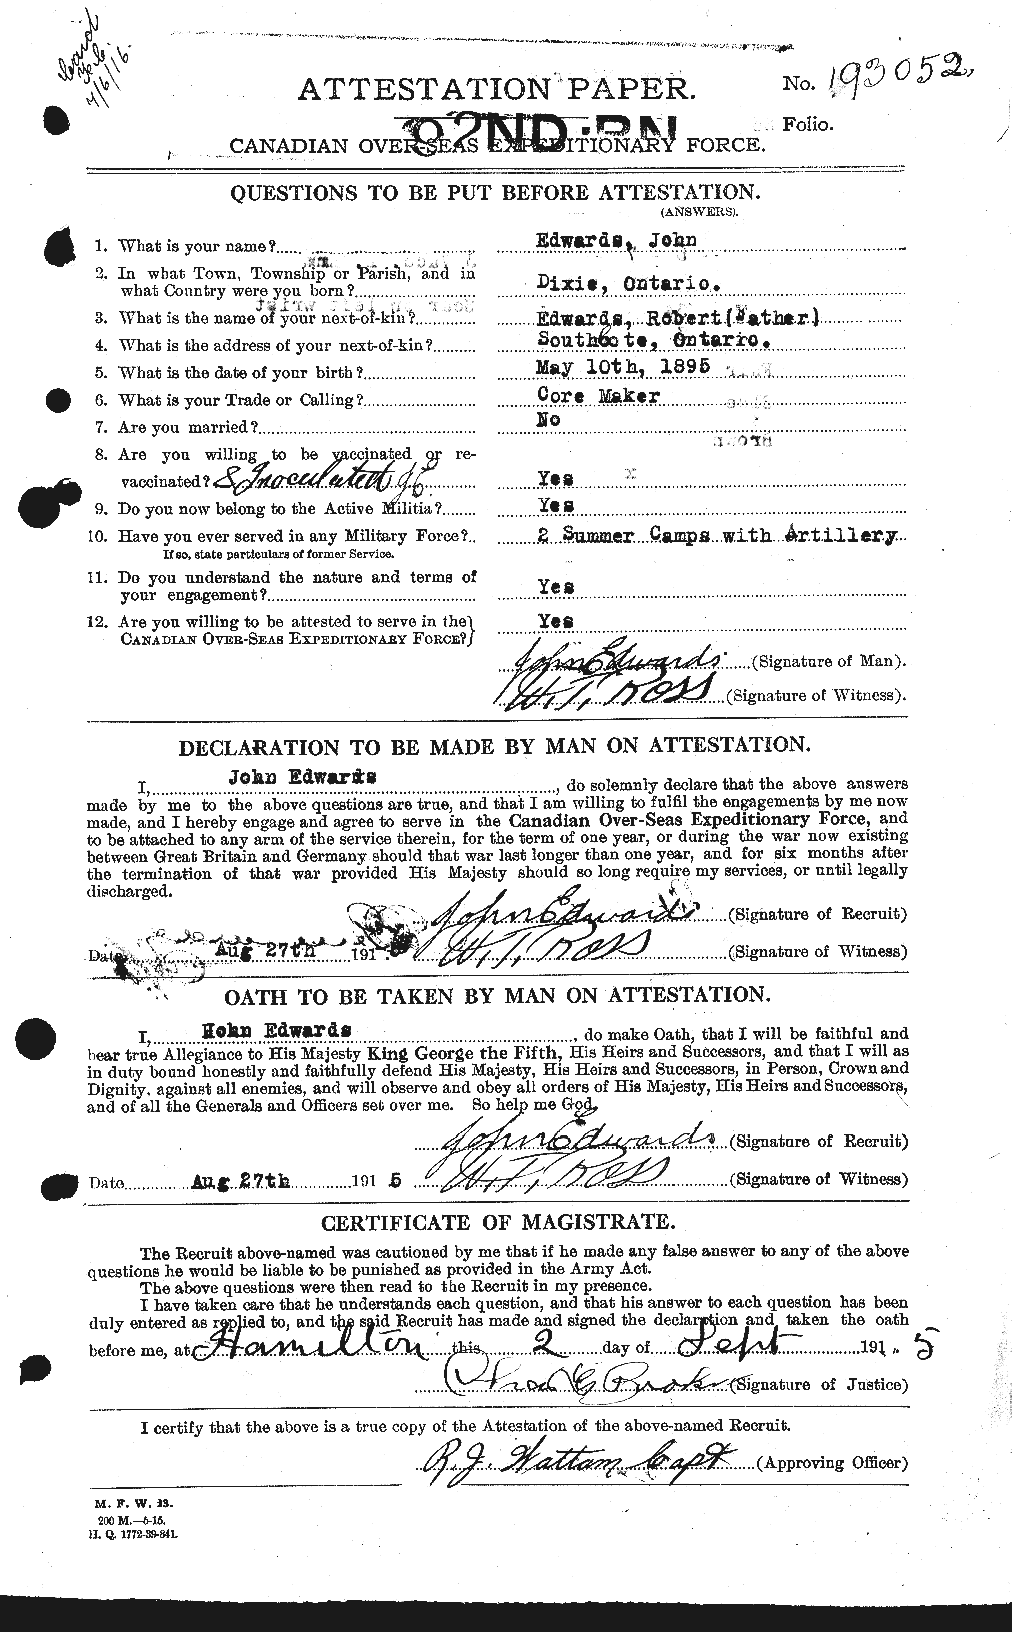 Personnel Records of the First World War - CEF 309837a